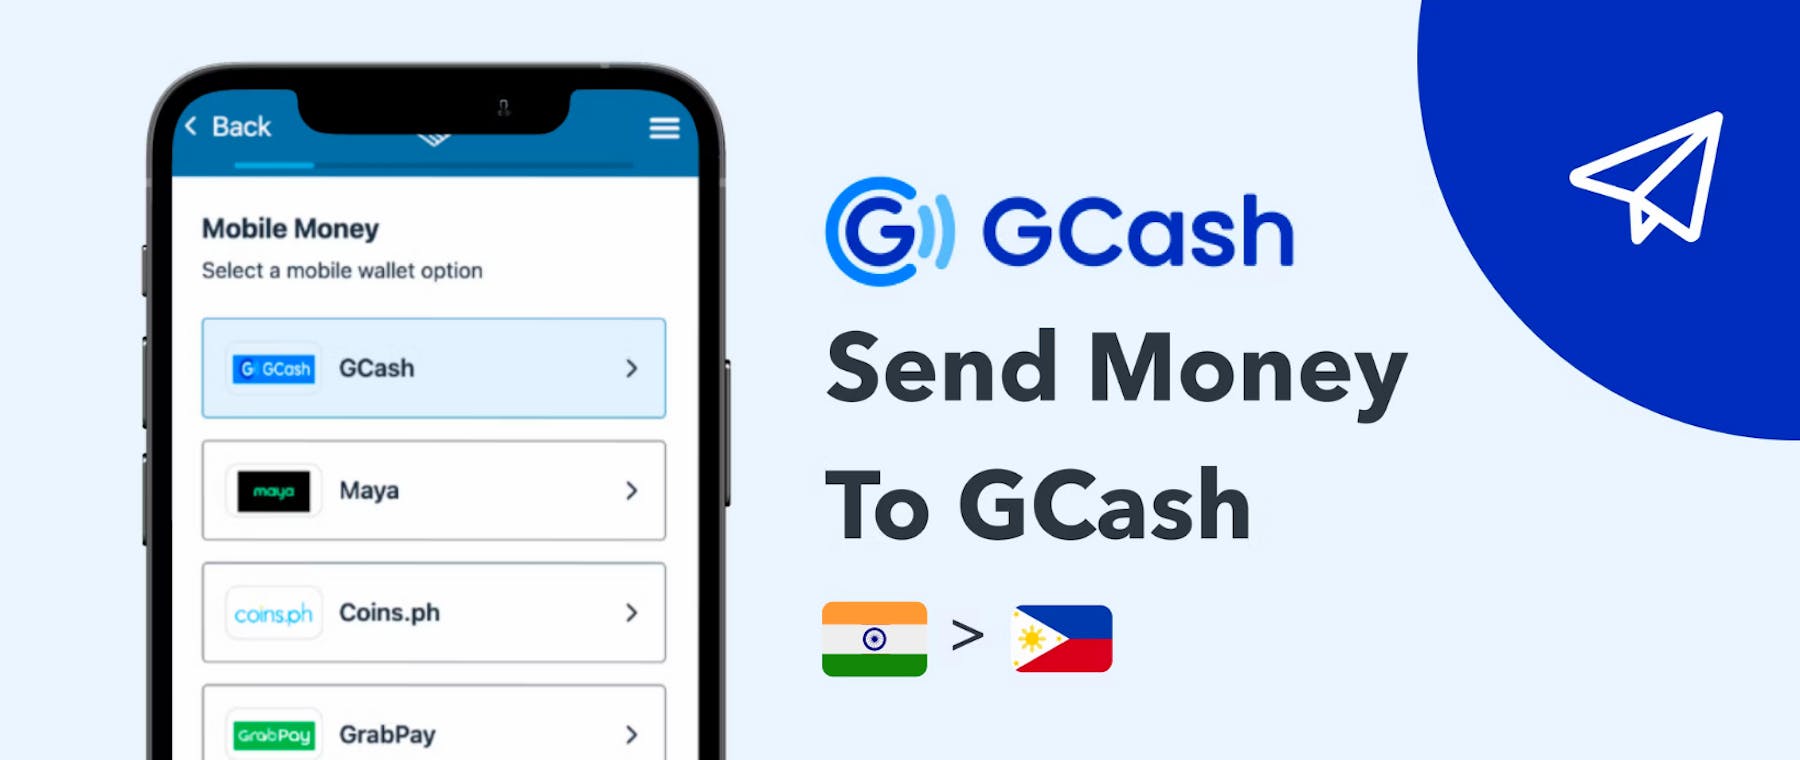 How can I receive money from other country to India?